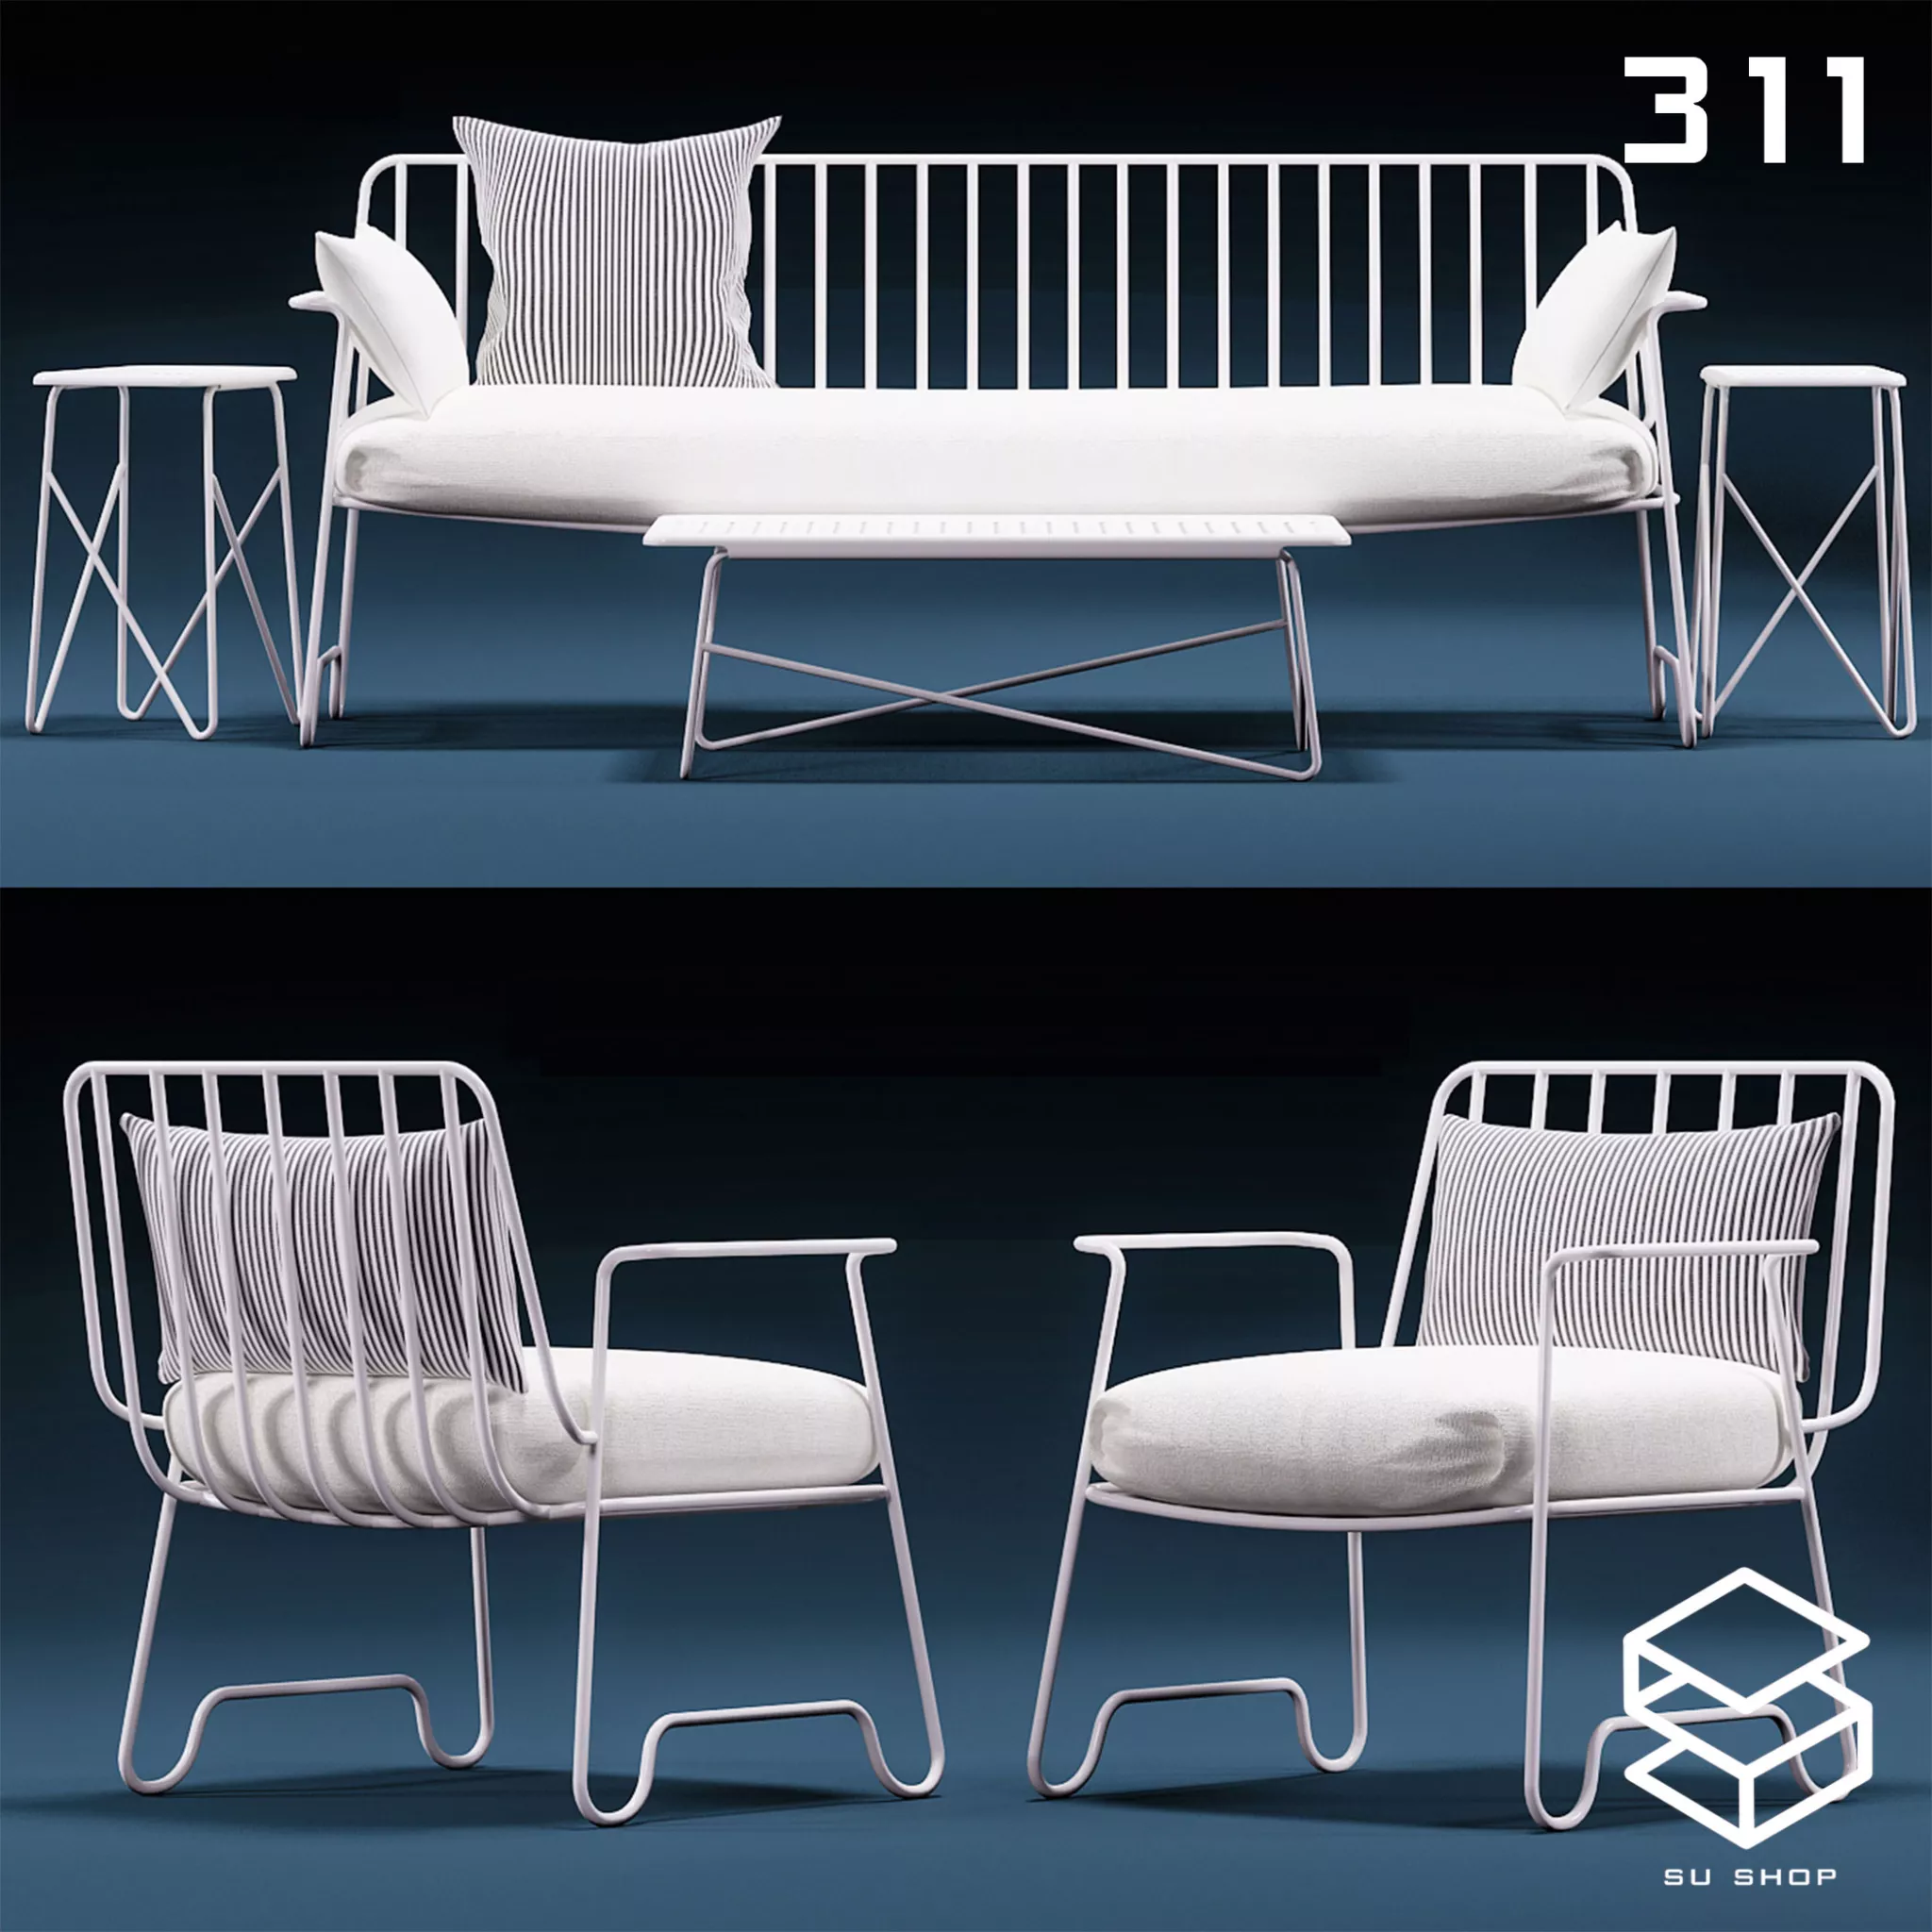 MODERN SOFA - SKETCHUP 3D MODEL - VRAY OR ENSCAPE - ID13621